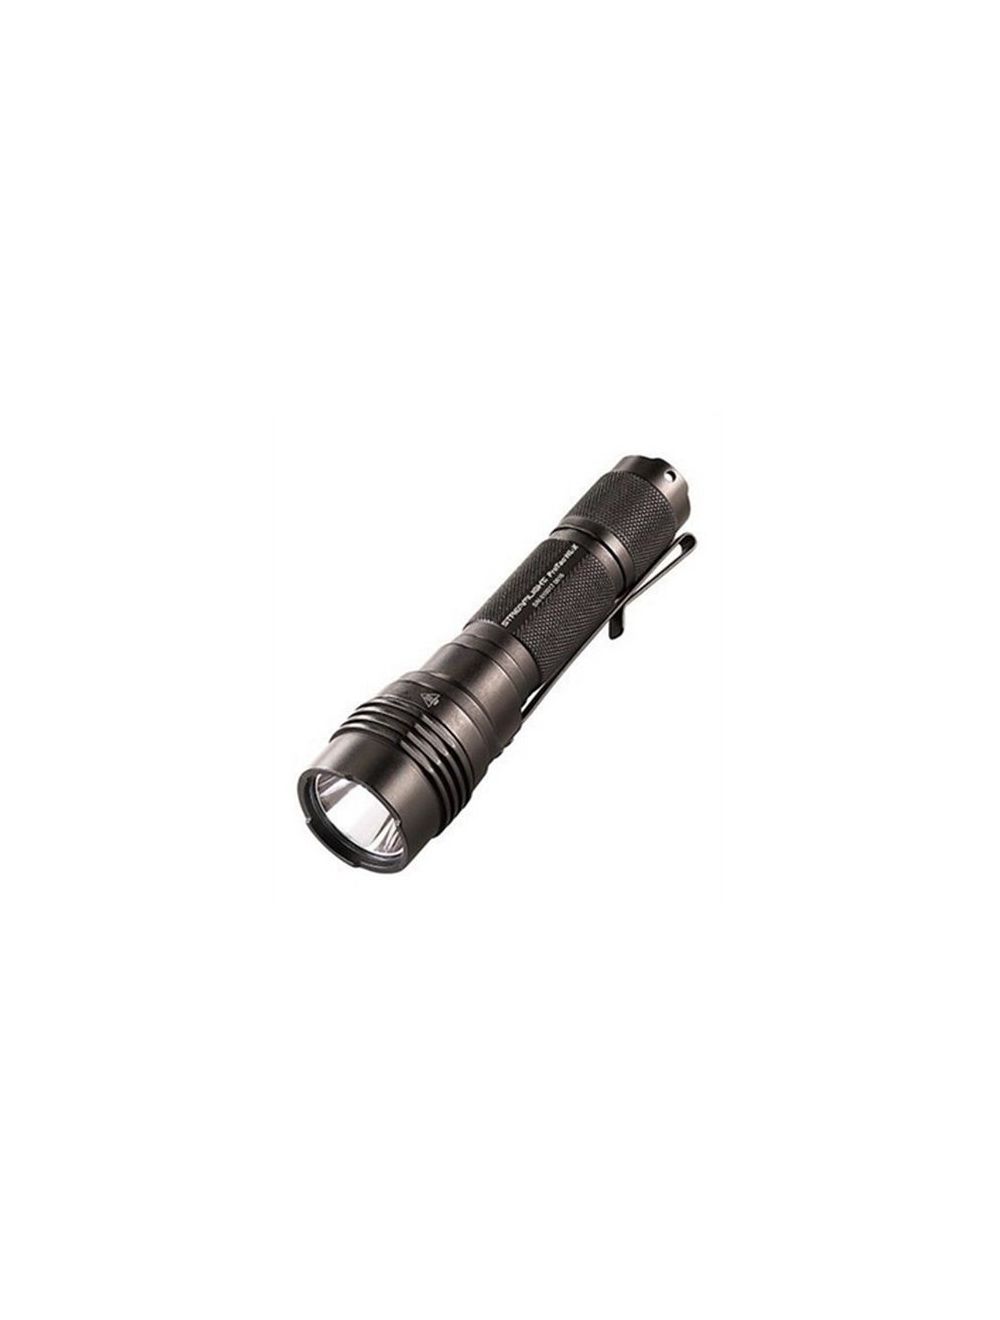 ProTac HL-X Flashlight with USB Rechargeable Battery